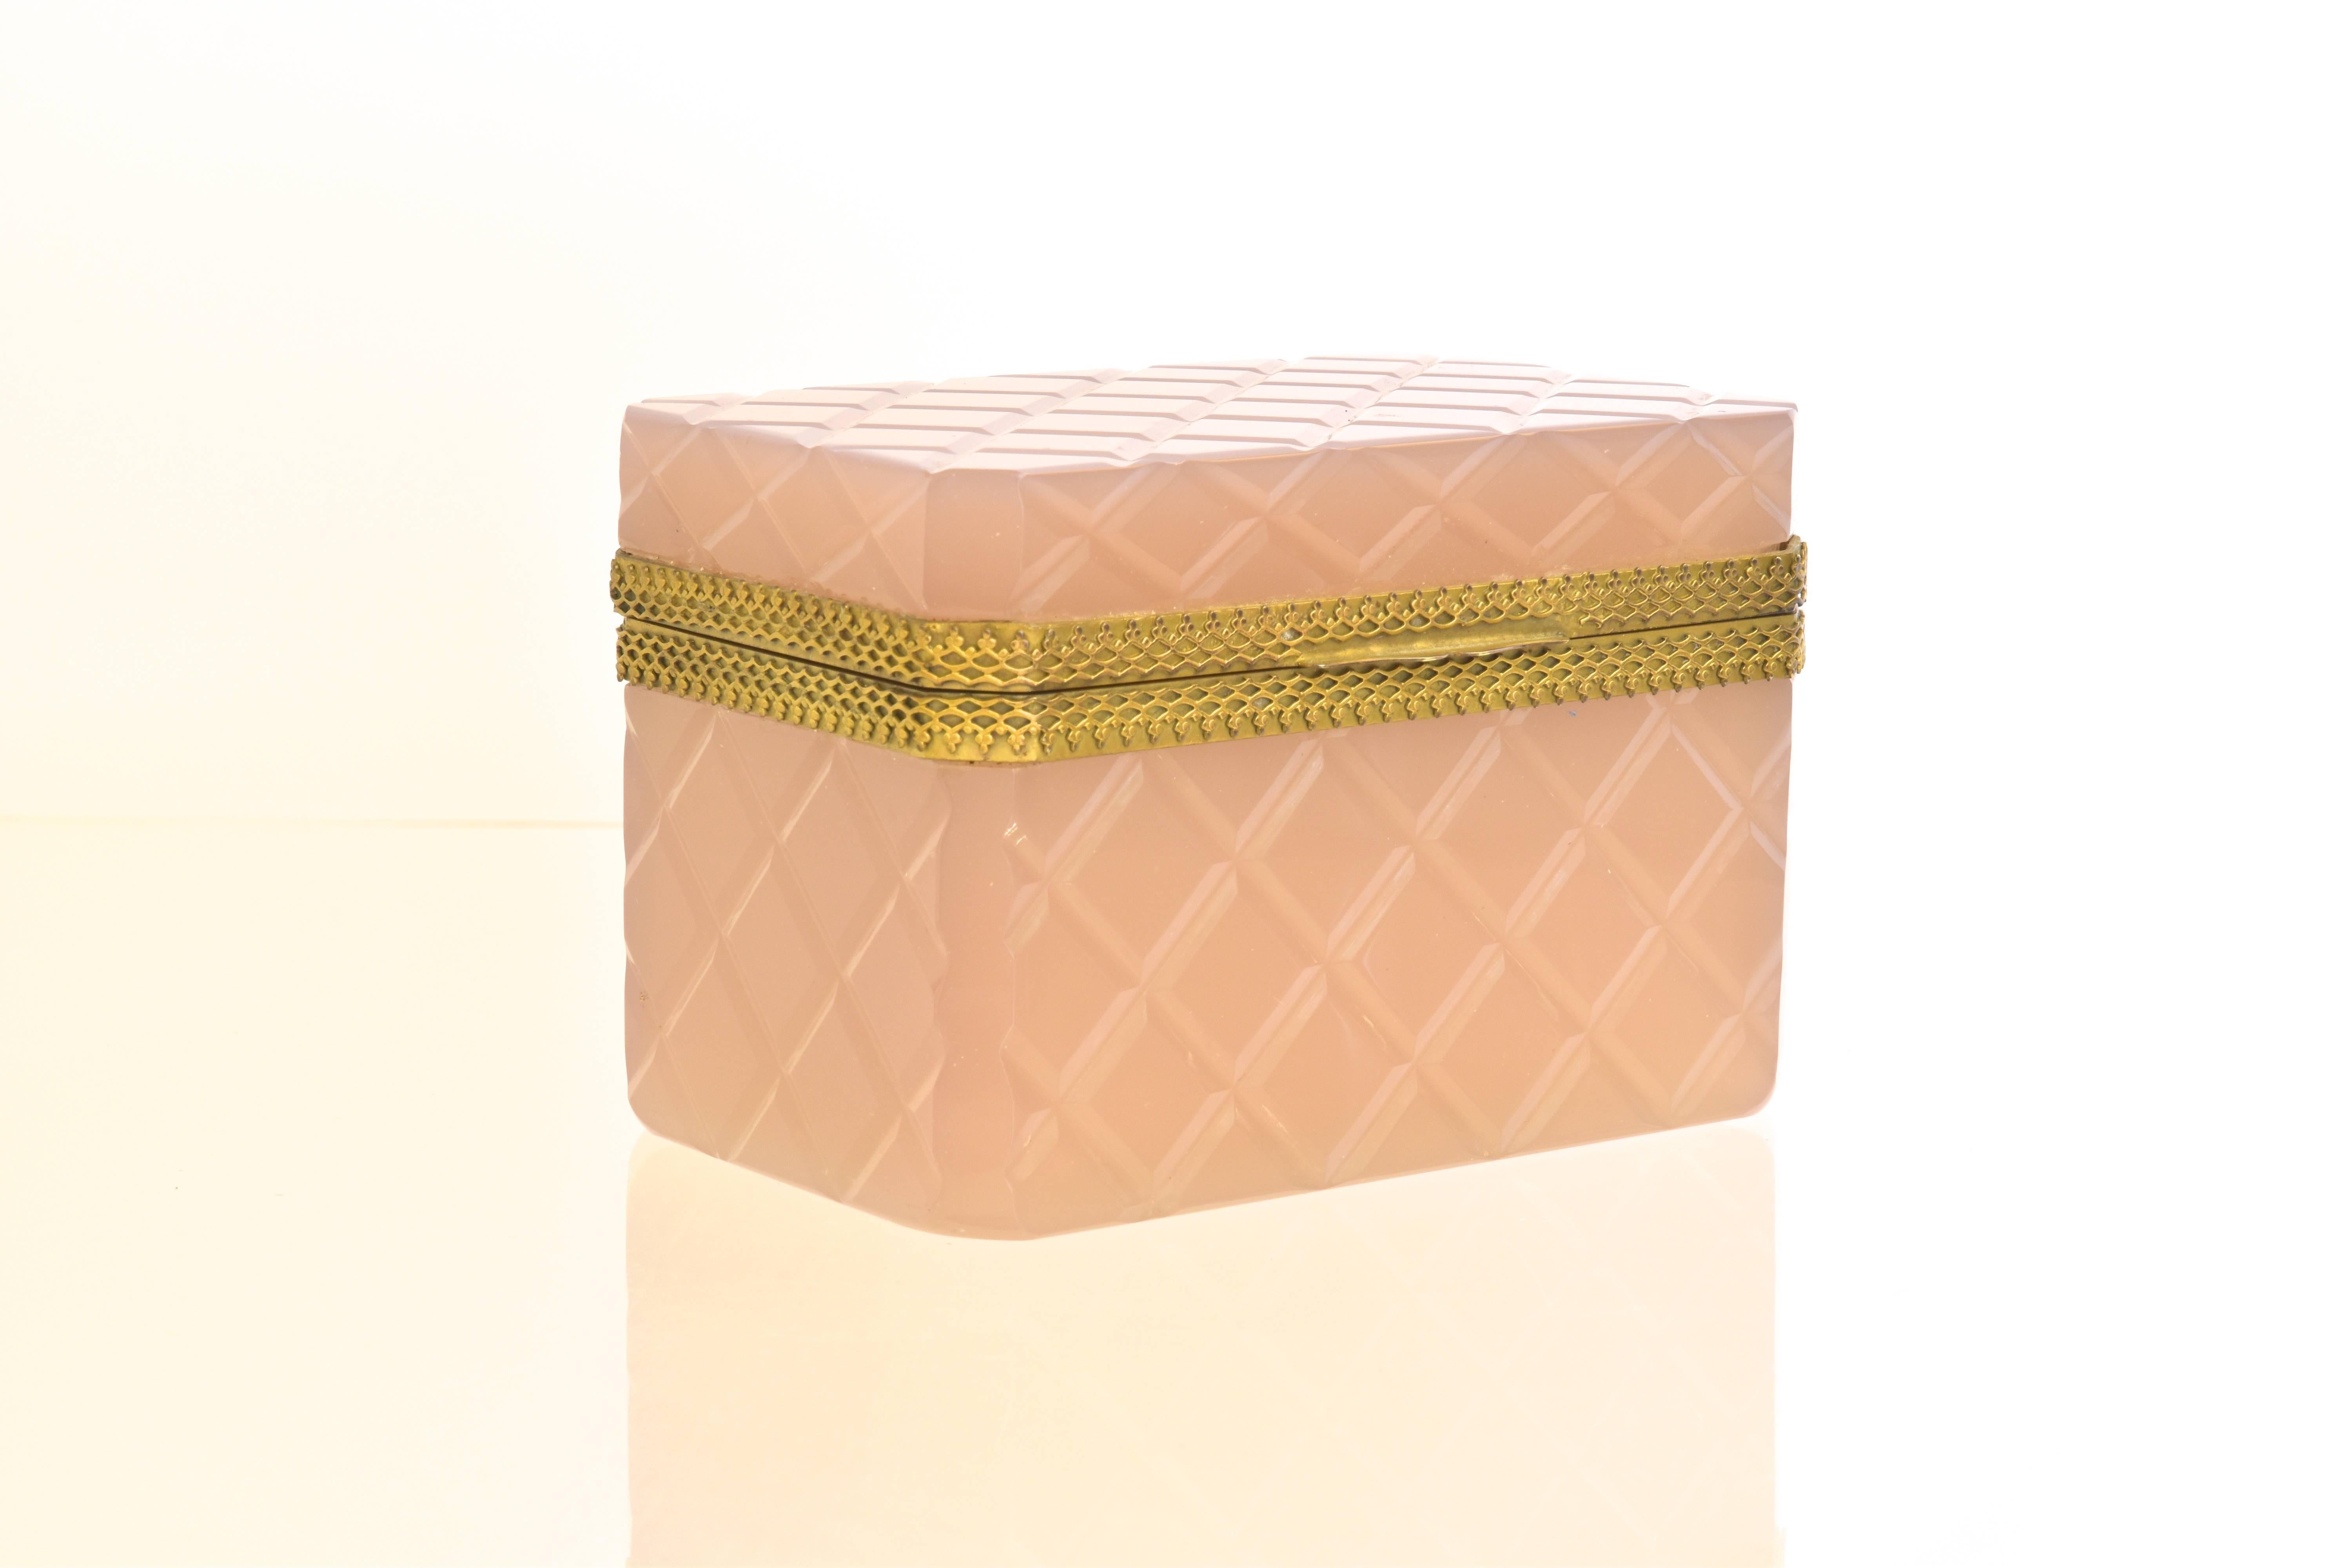 A beautifully detailed Murano trinket box with cut corners and diamond pattern throughout. The glass box is hinged and is in a soft shade of pastel pink.